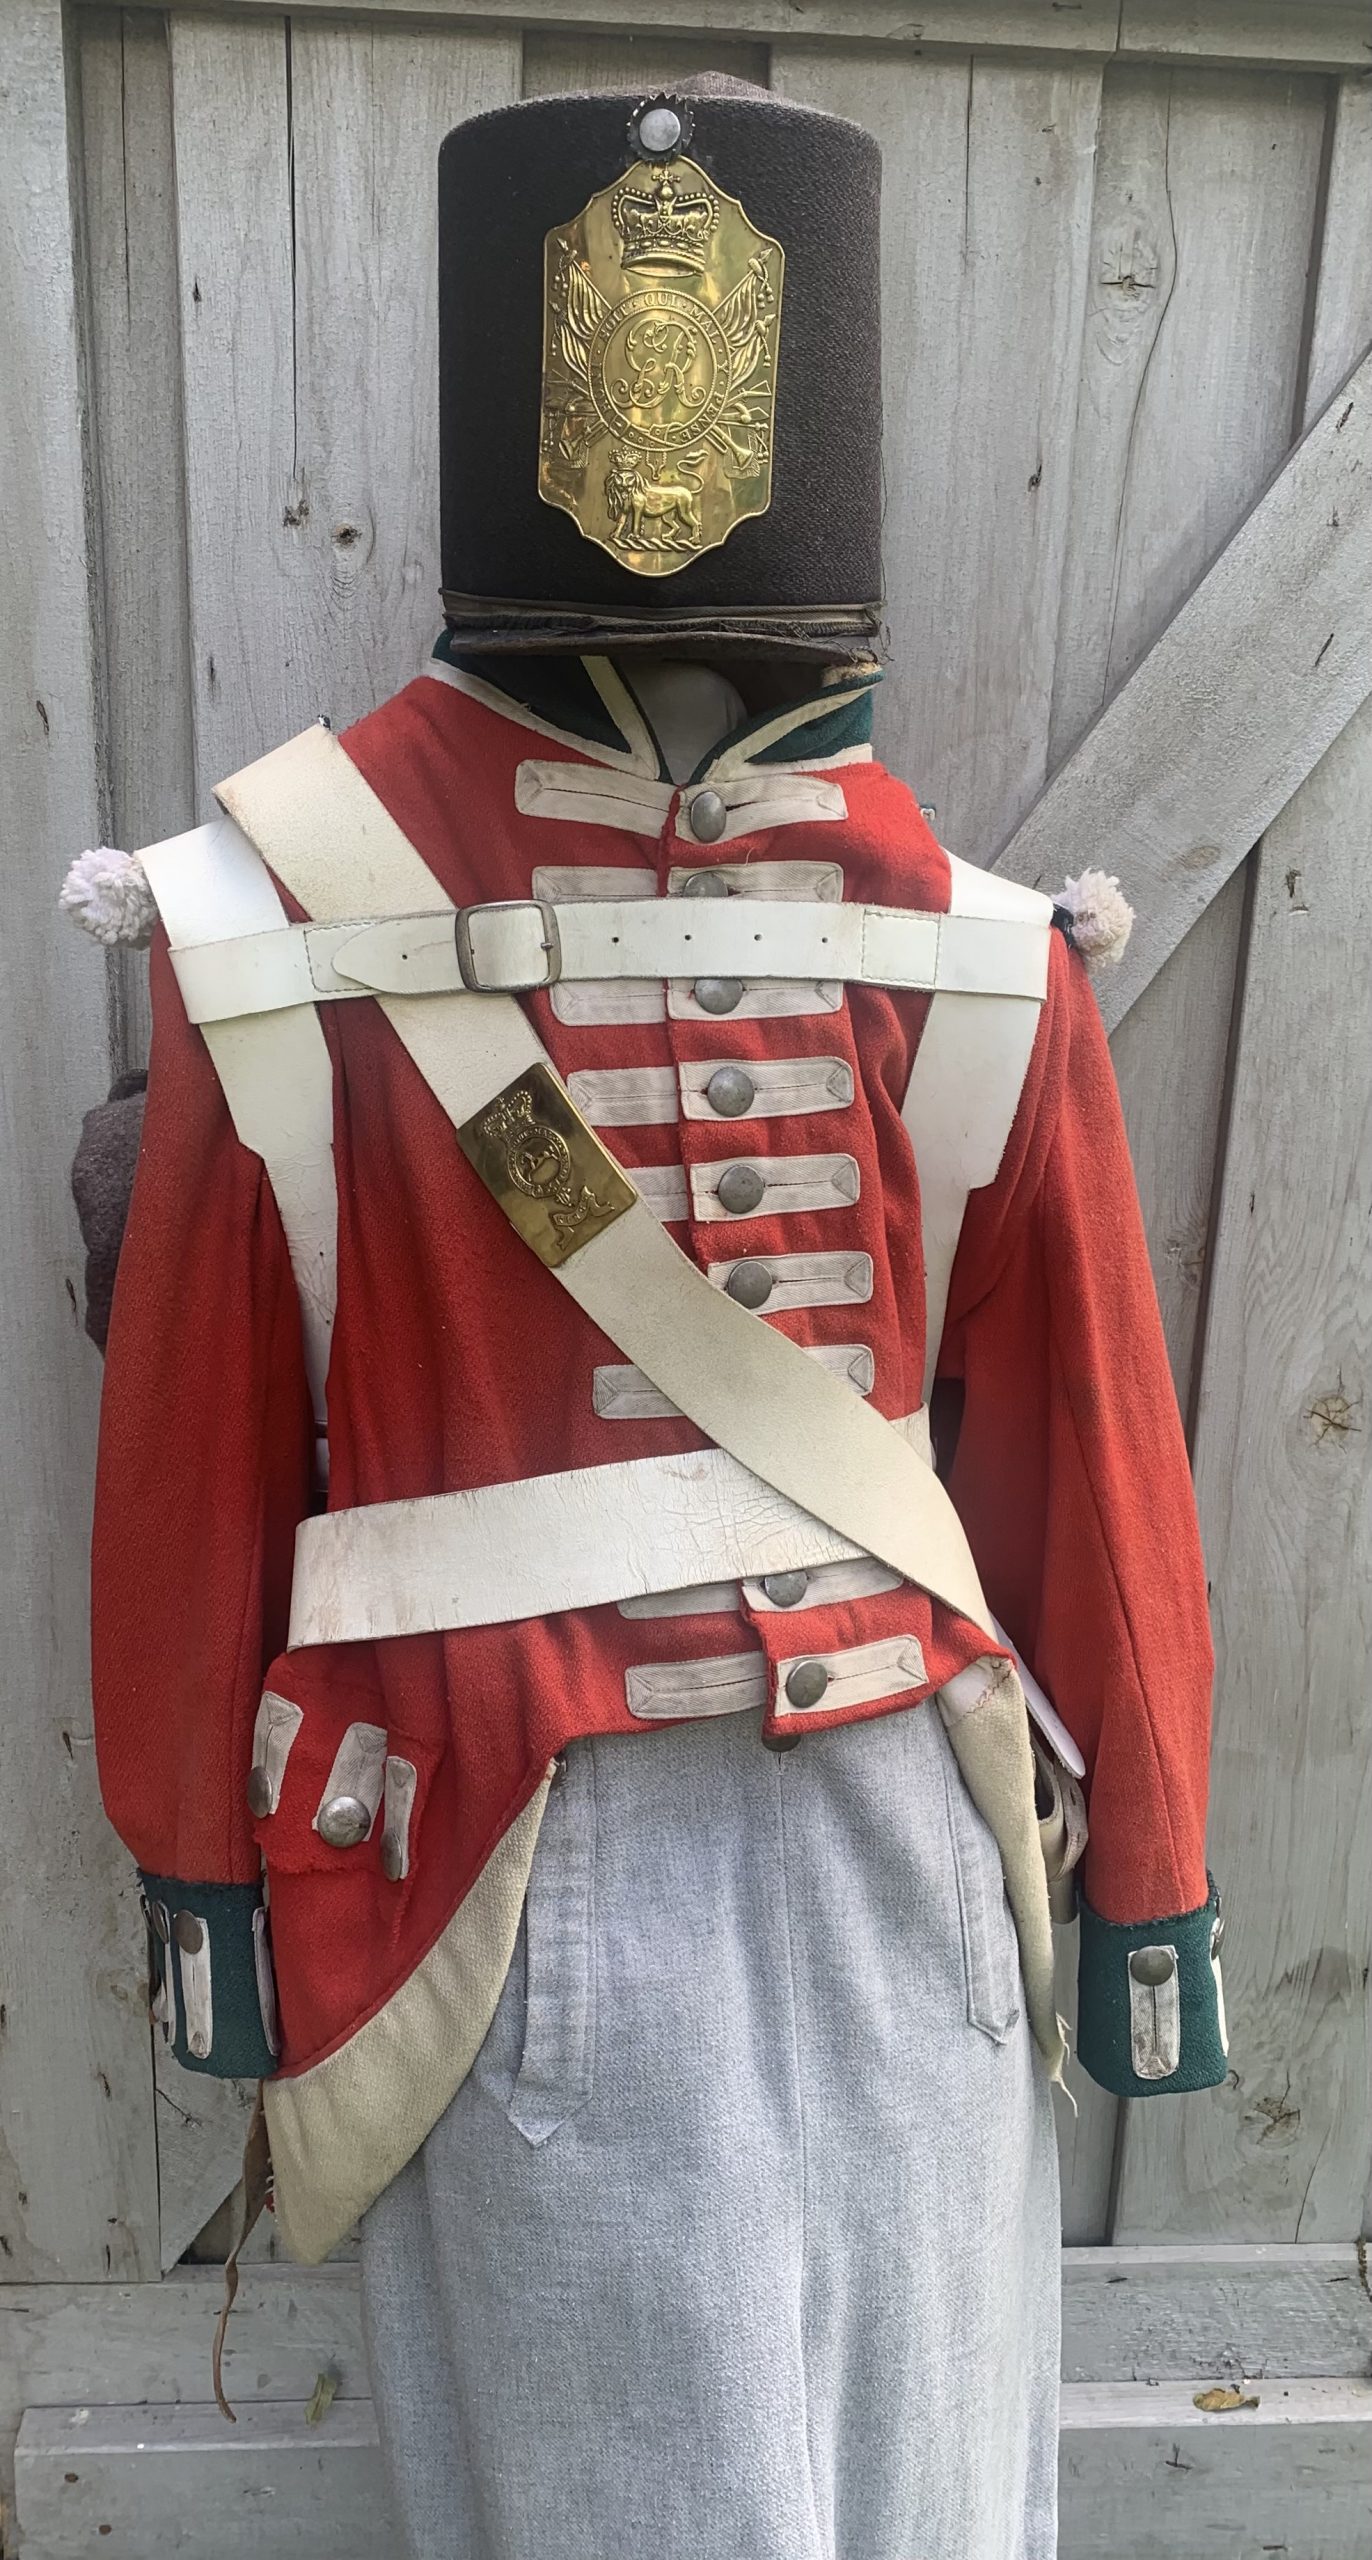 Replica outfit of the British Army. Scarlet tunic and tall, cylindrical military cap with sargent's plate.